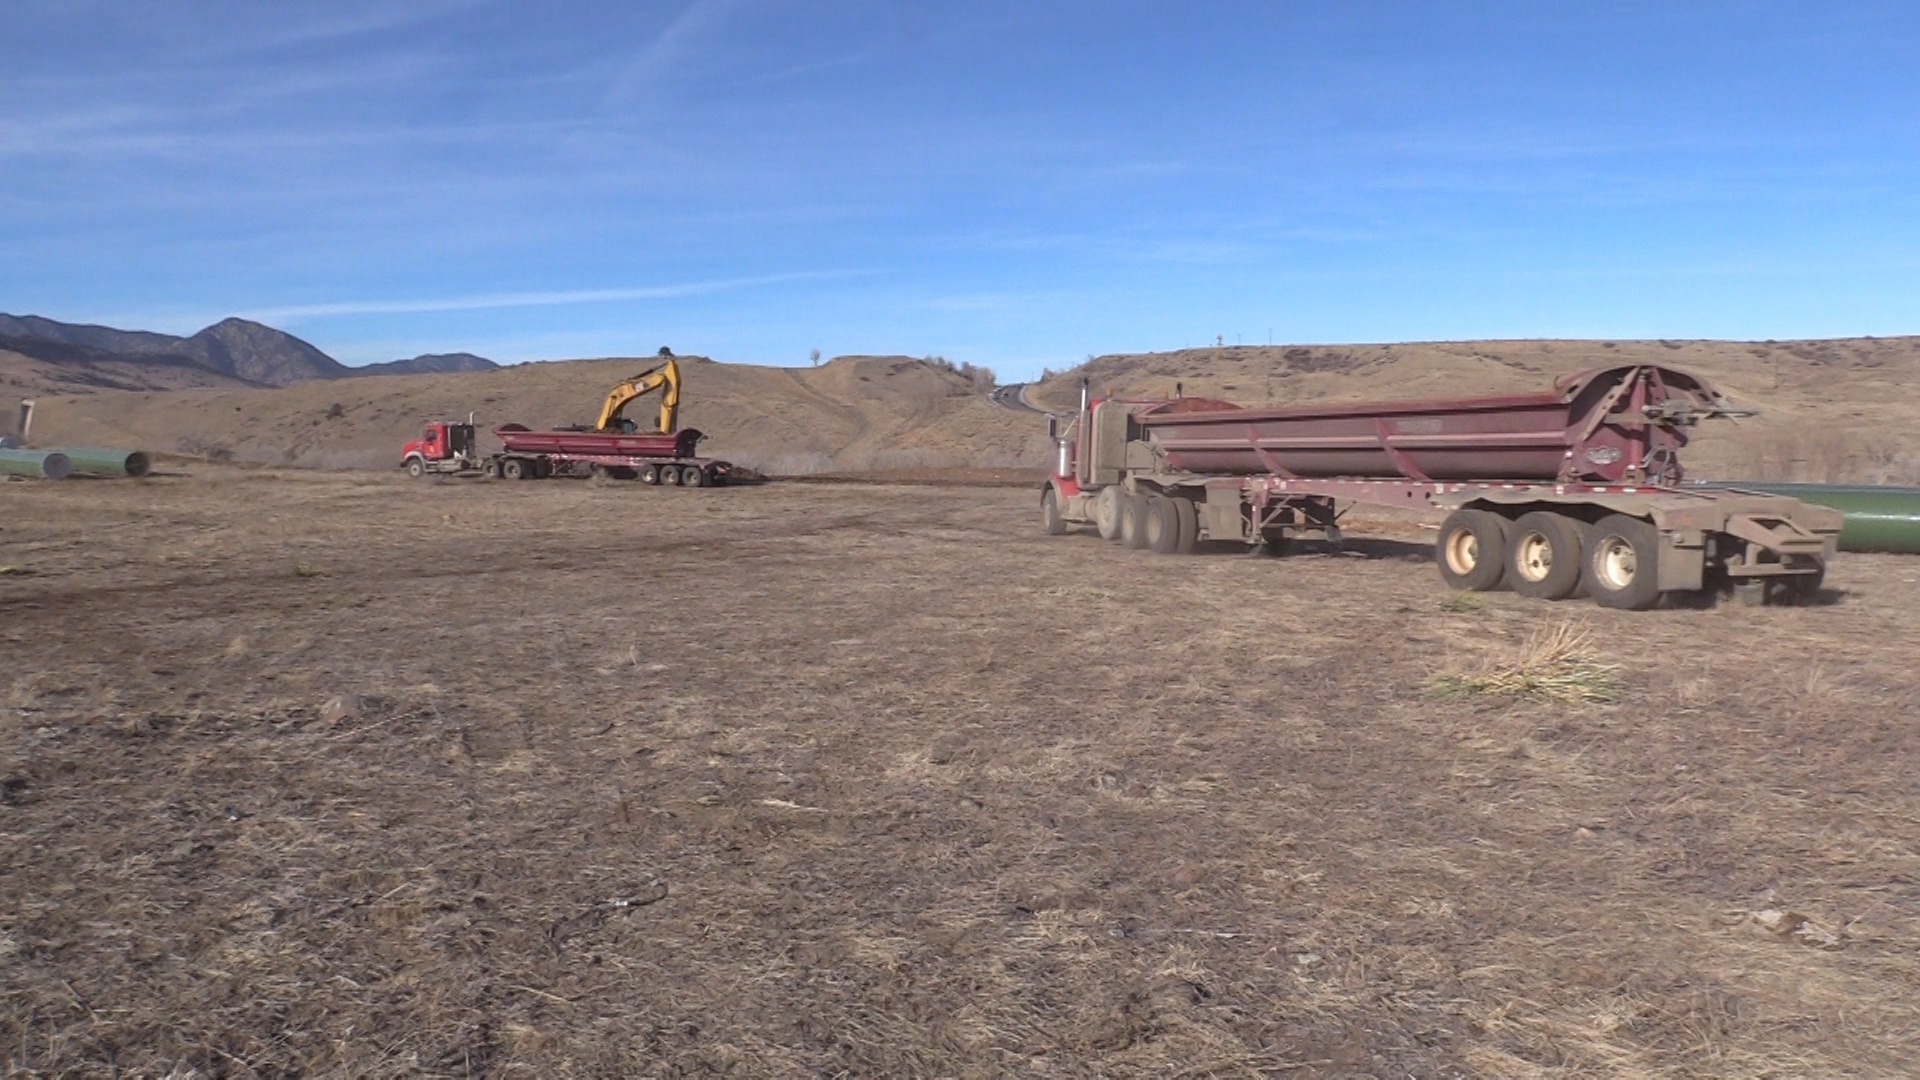 Red trucks are lined up to be filled with dirt dug from the earth. In the distance, Highway 93 carves through the foothills under a blue sky.